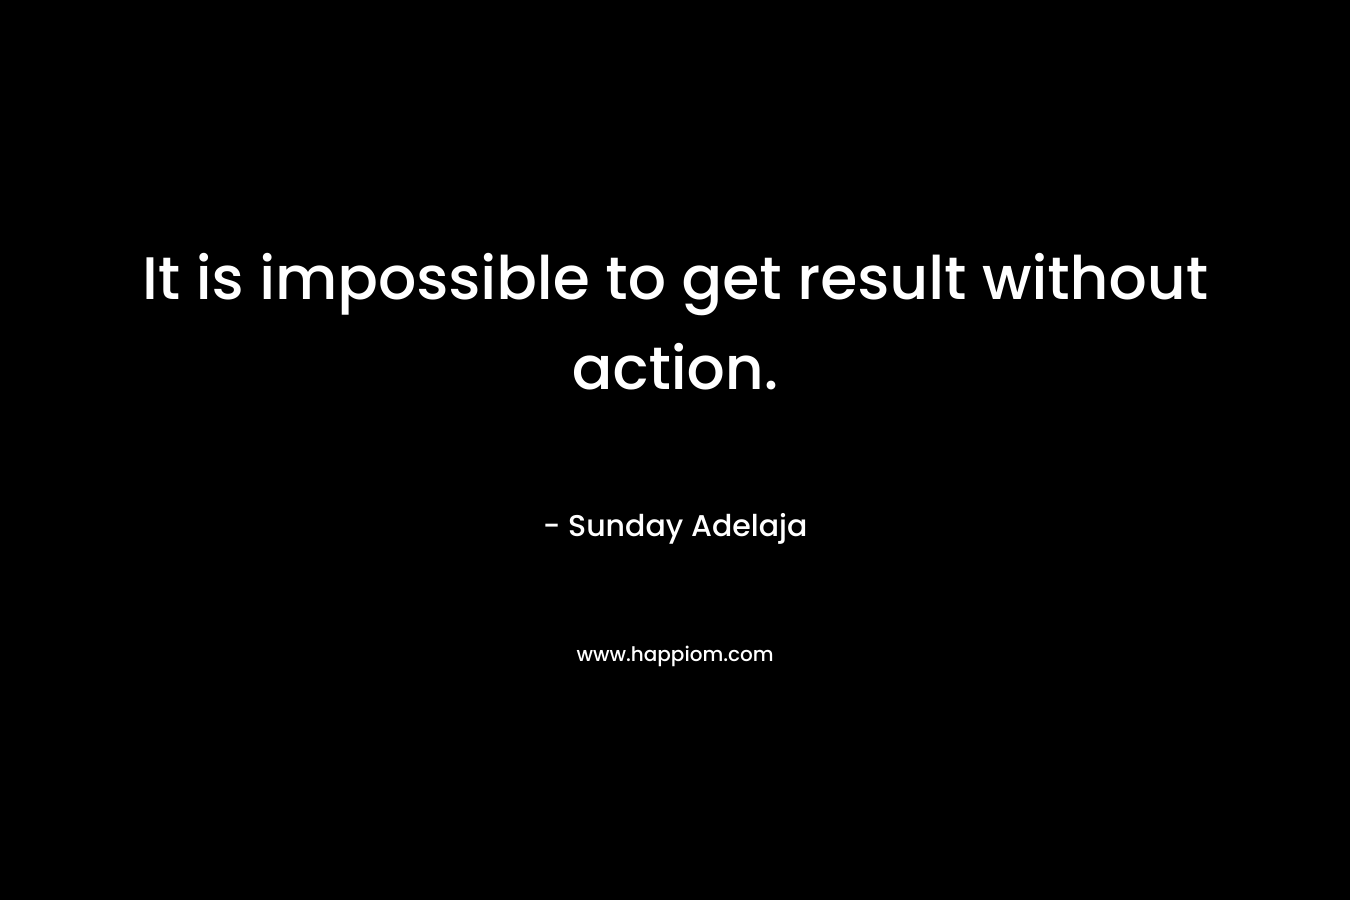 It is impossible to get result without action.